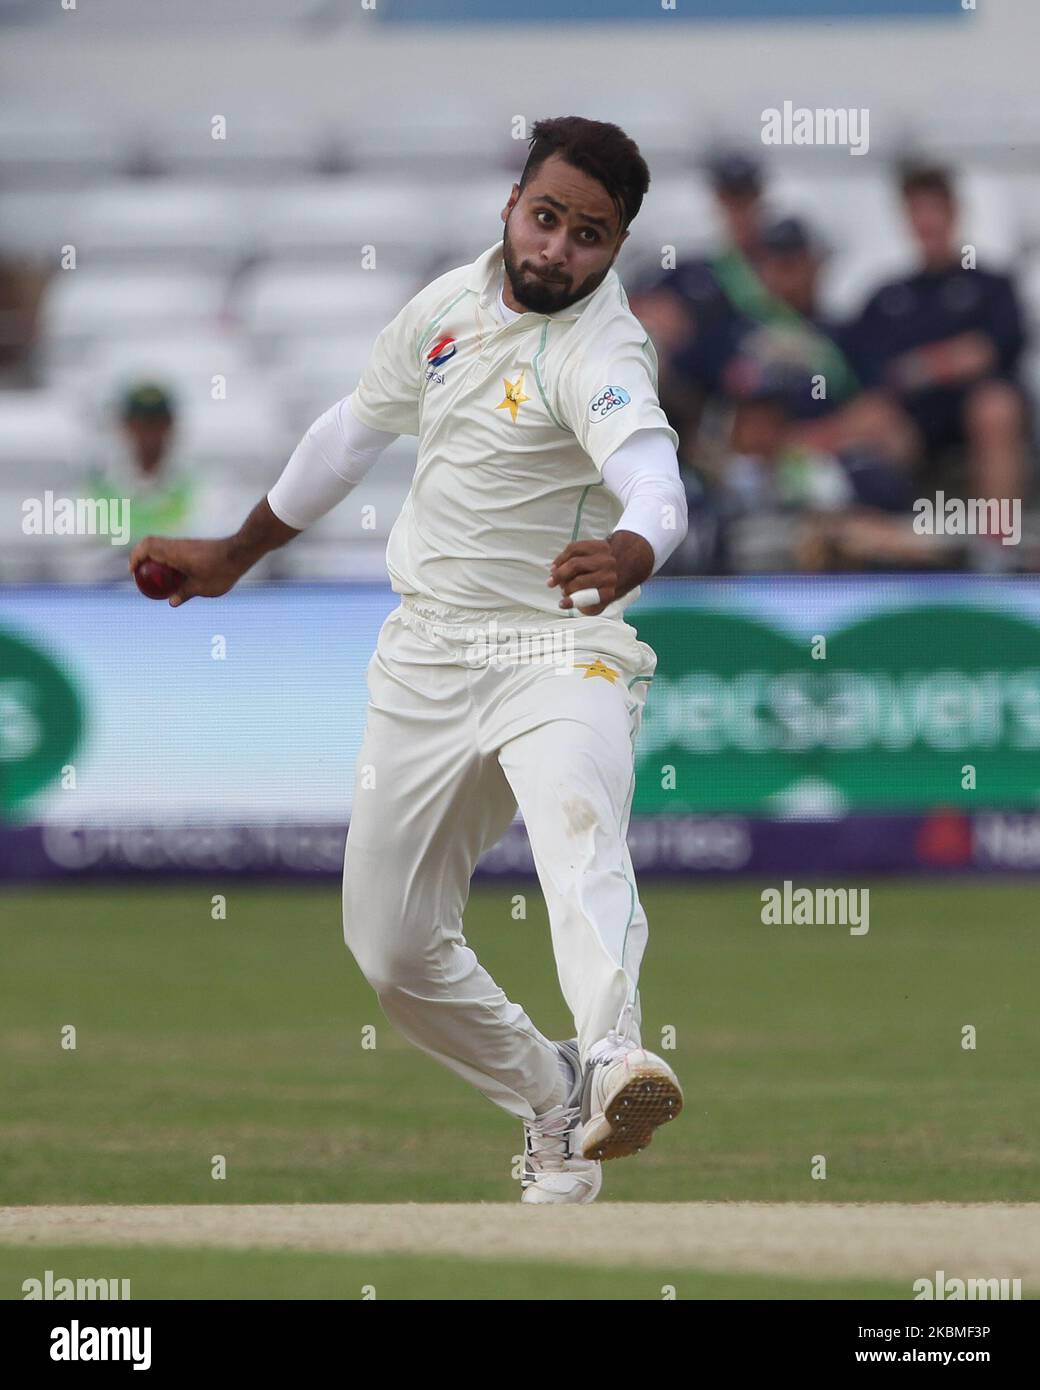 Faheem Ashraf of Pakistan bowling during the first day of the Second Nat West Test match between England and Pakistan at Headingley Cricket Ground, Leeds on Friday 1st June 2018. (Photo by Mark Fletcher/MI News/NurPhoto) Stock Photo